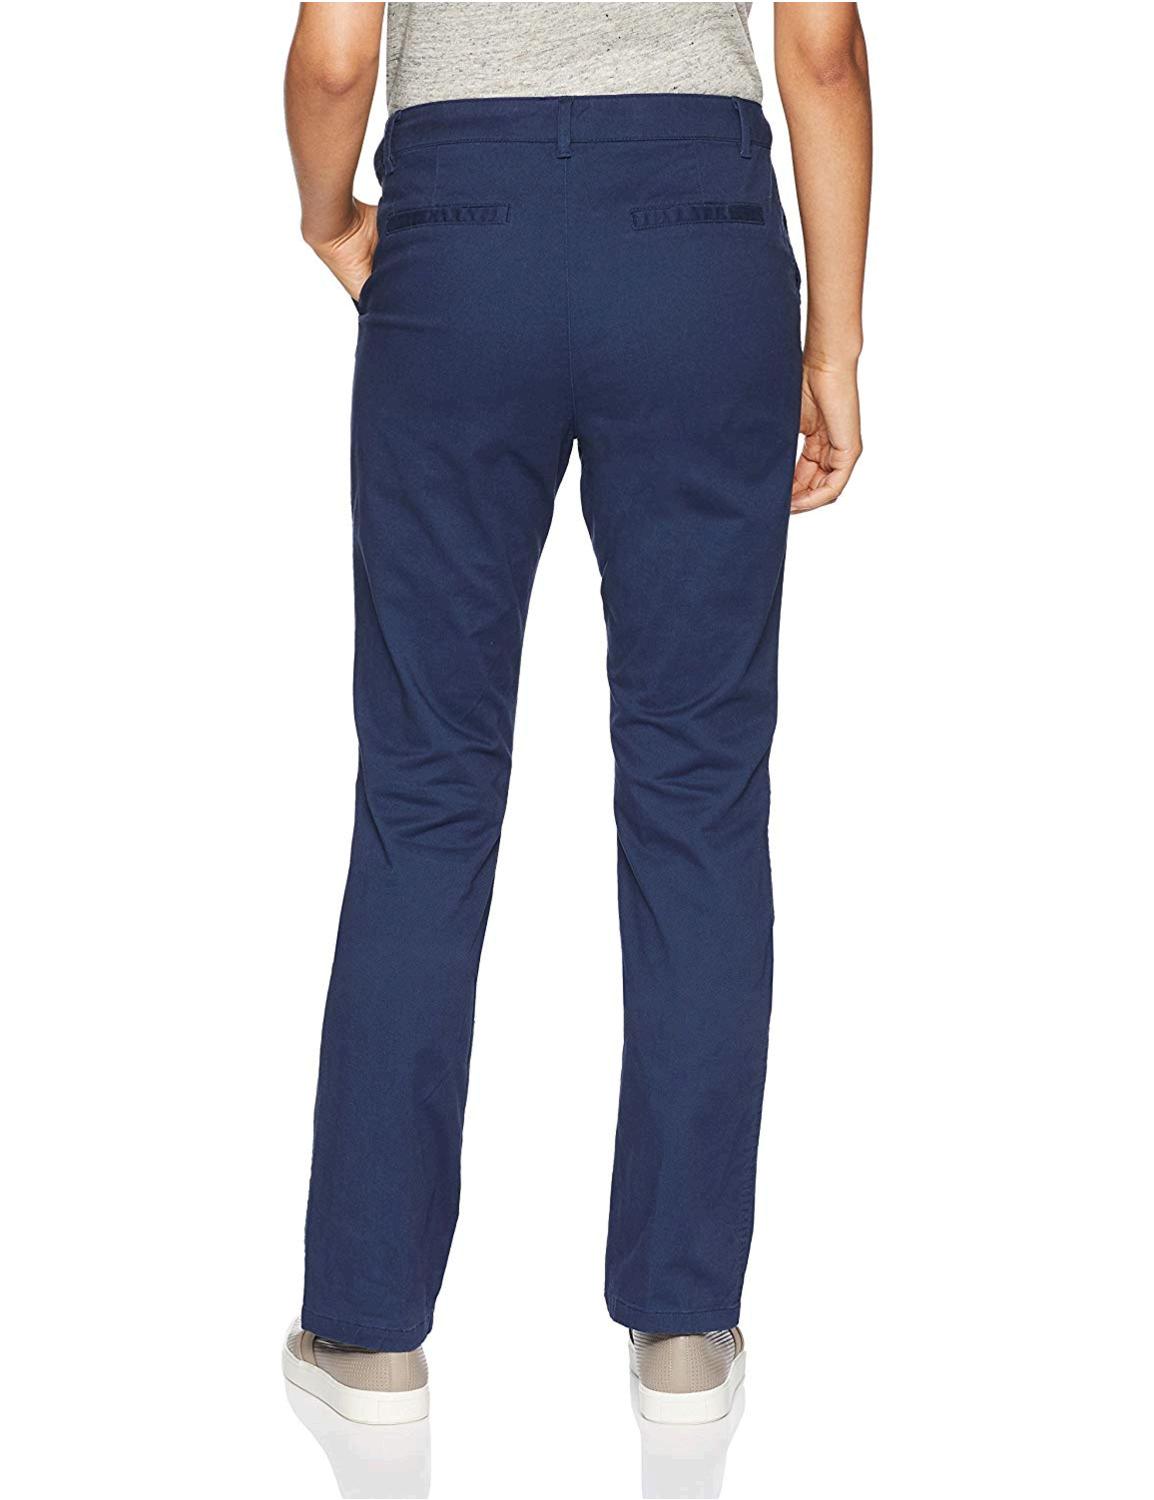 Essentials Women's Straight-Fit Stretch Twill Chino Pant,, Navy, Size 6 ...